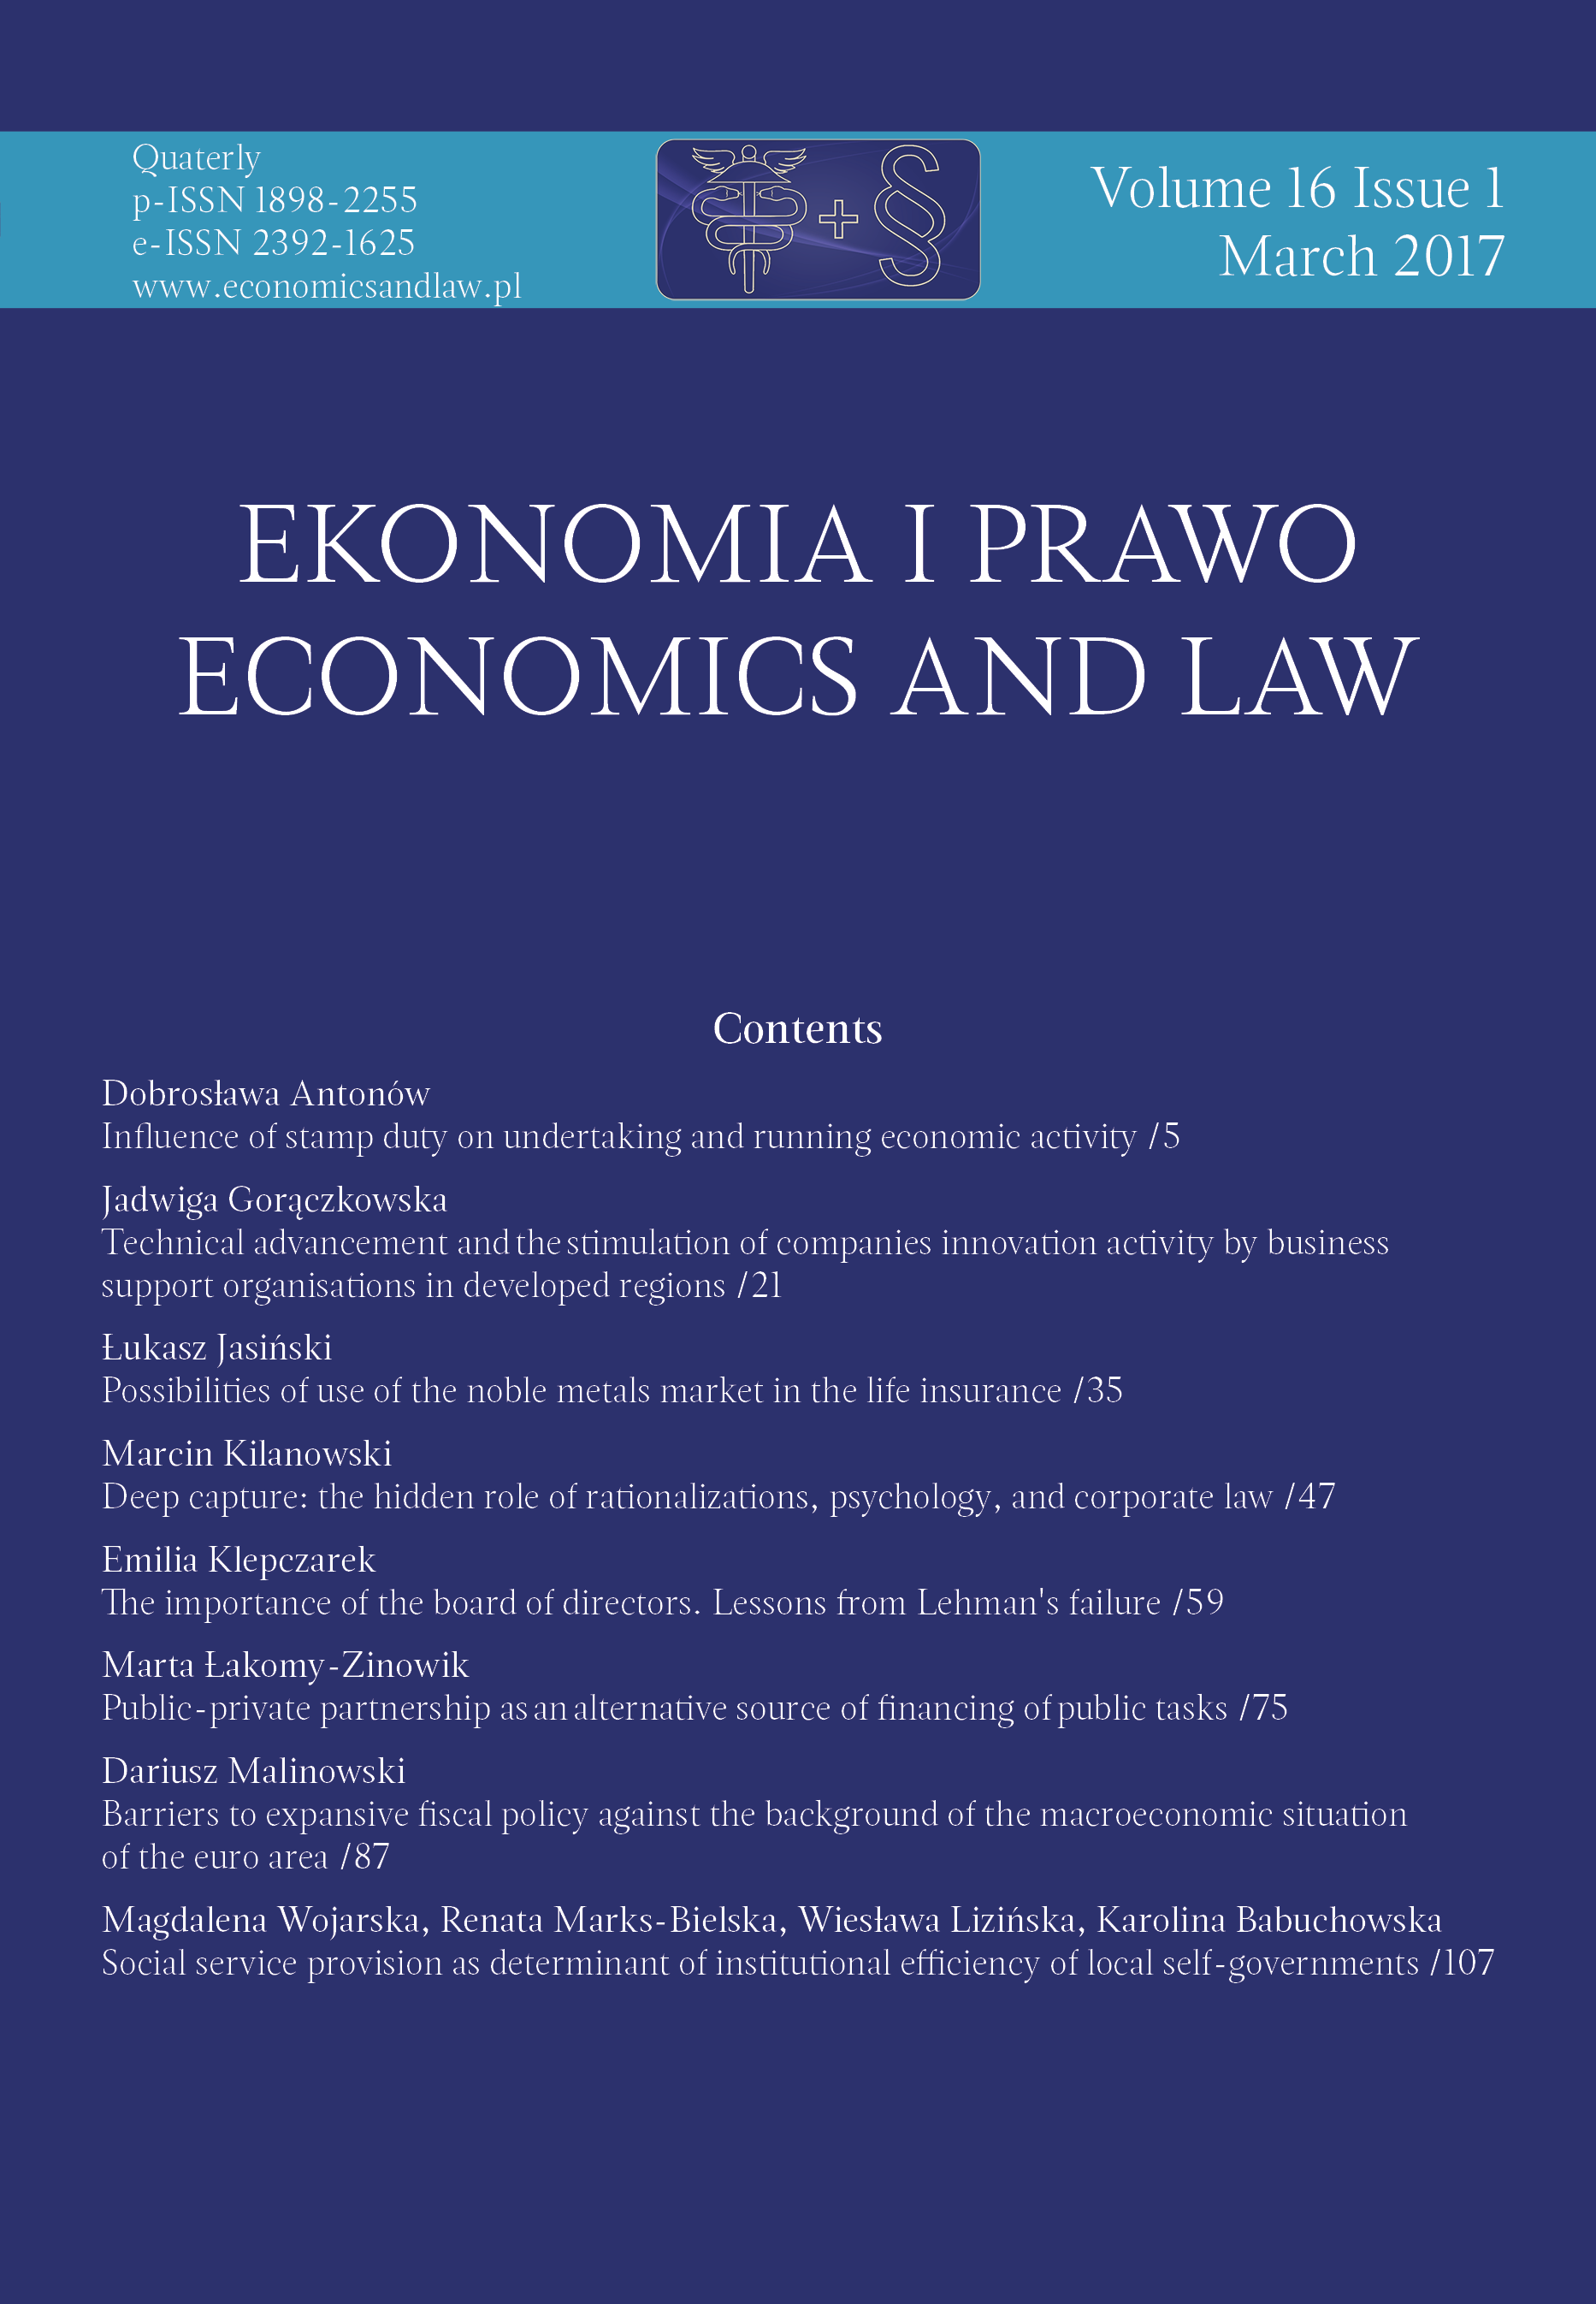 Barriers to expansive fiscal policy against the background of the macroeconomic situation of the euro area Cover Image